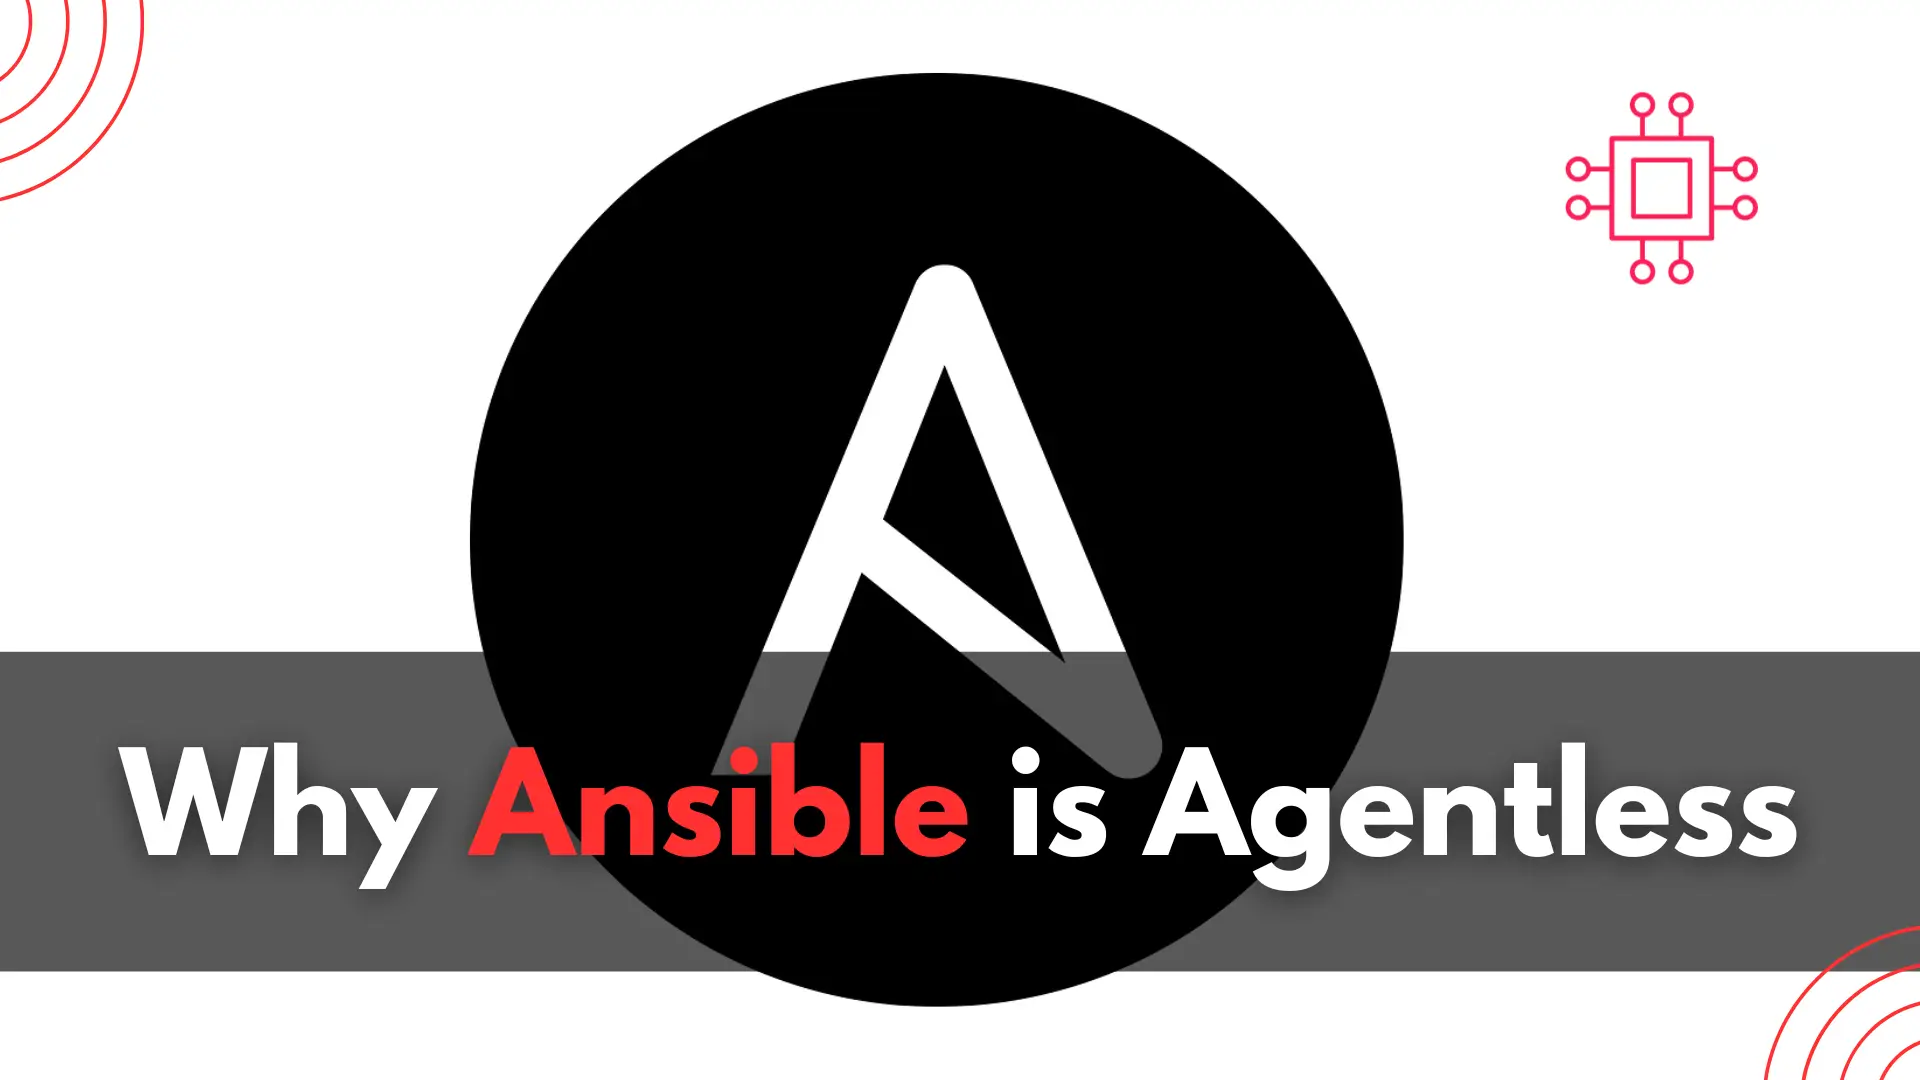 Why Ansible is Agentless